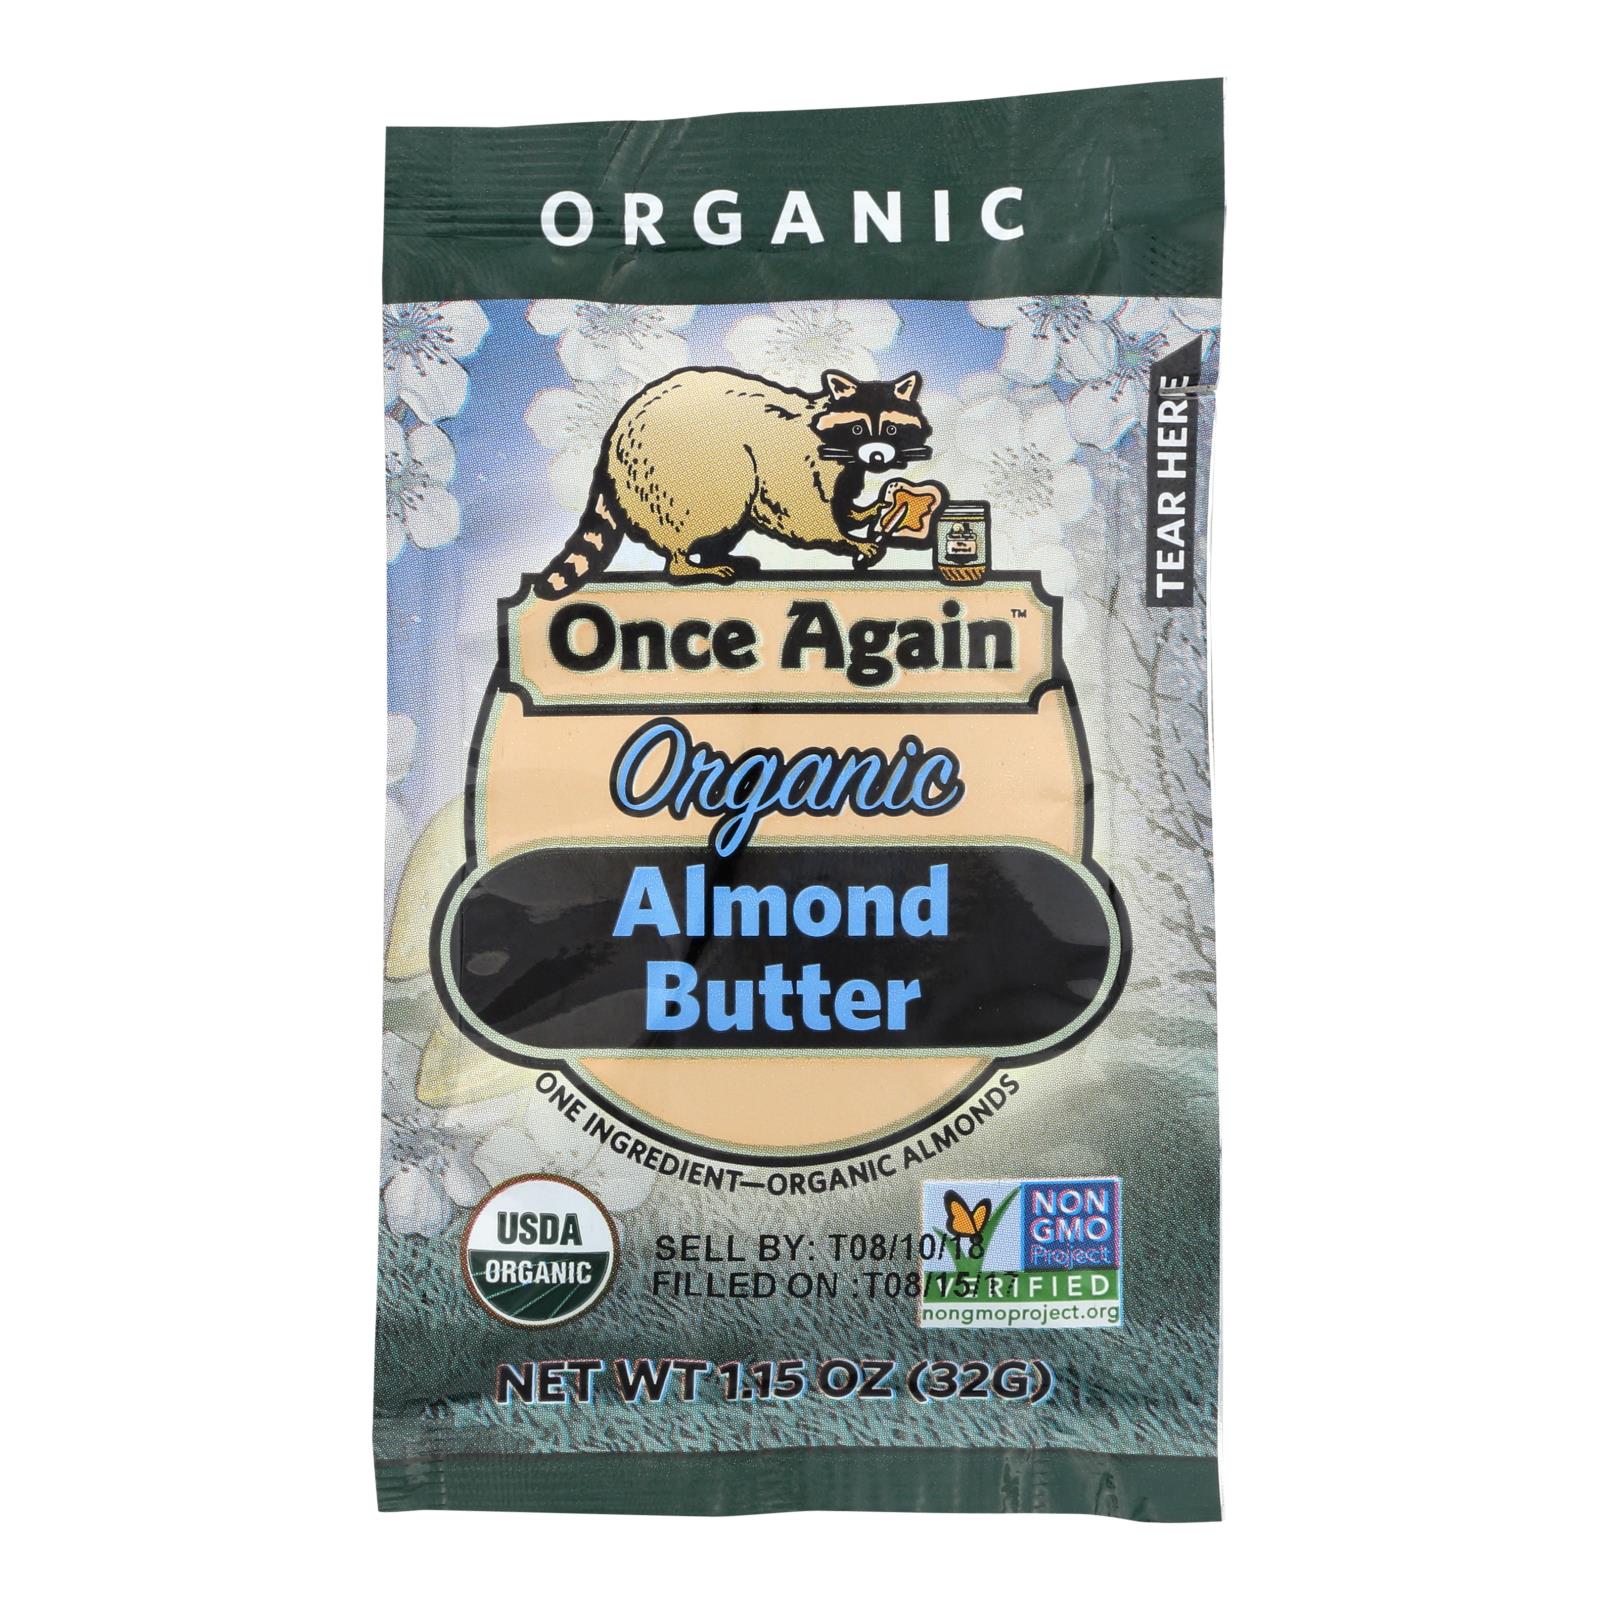 Once Again Almond Butter - Organic - Original - Squeeze Pack - 1.15 Oz - Case Of 10 - Whole Green Foods